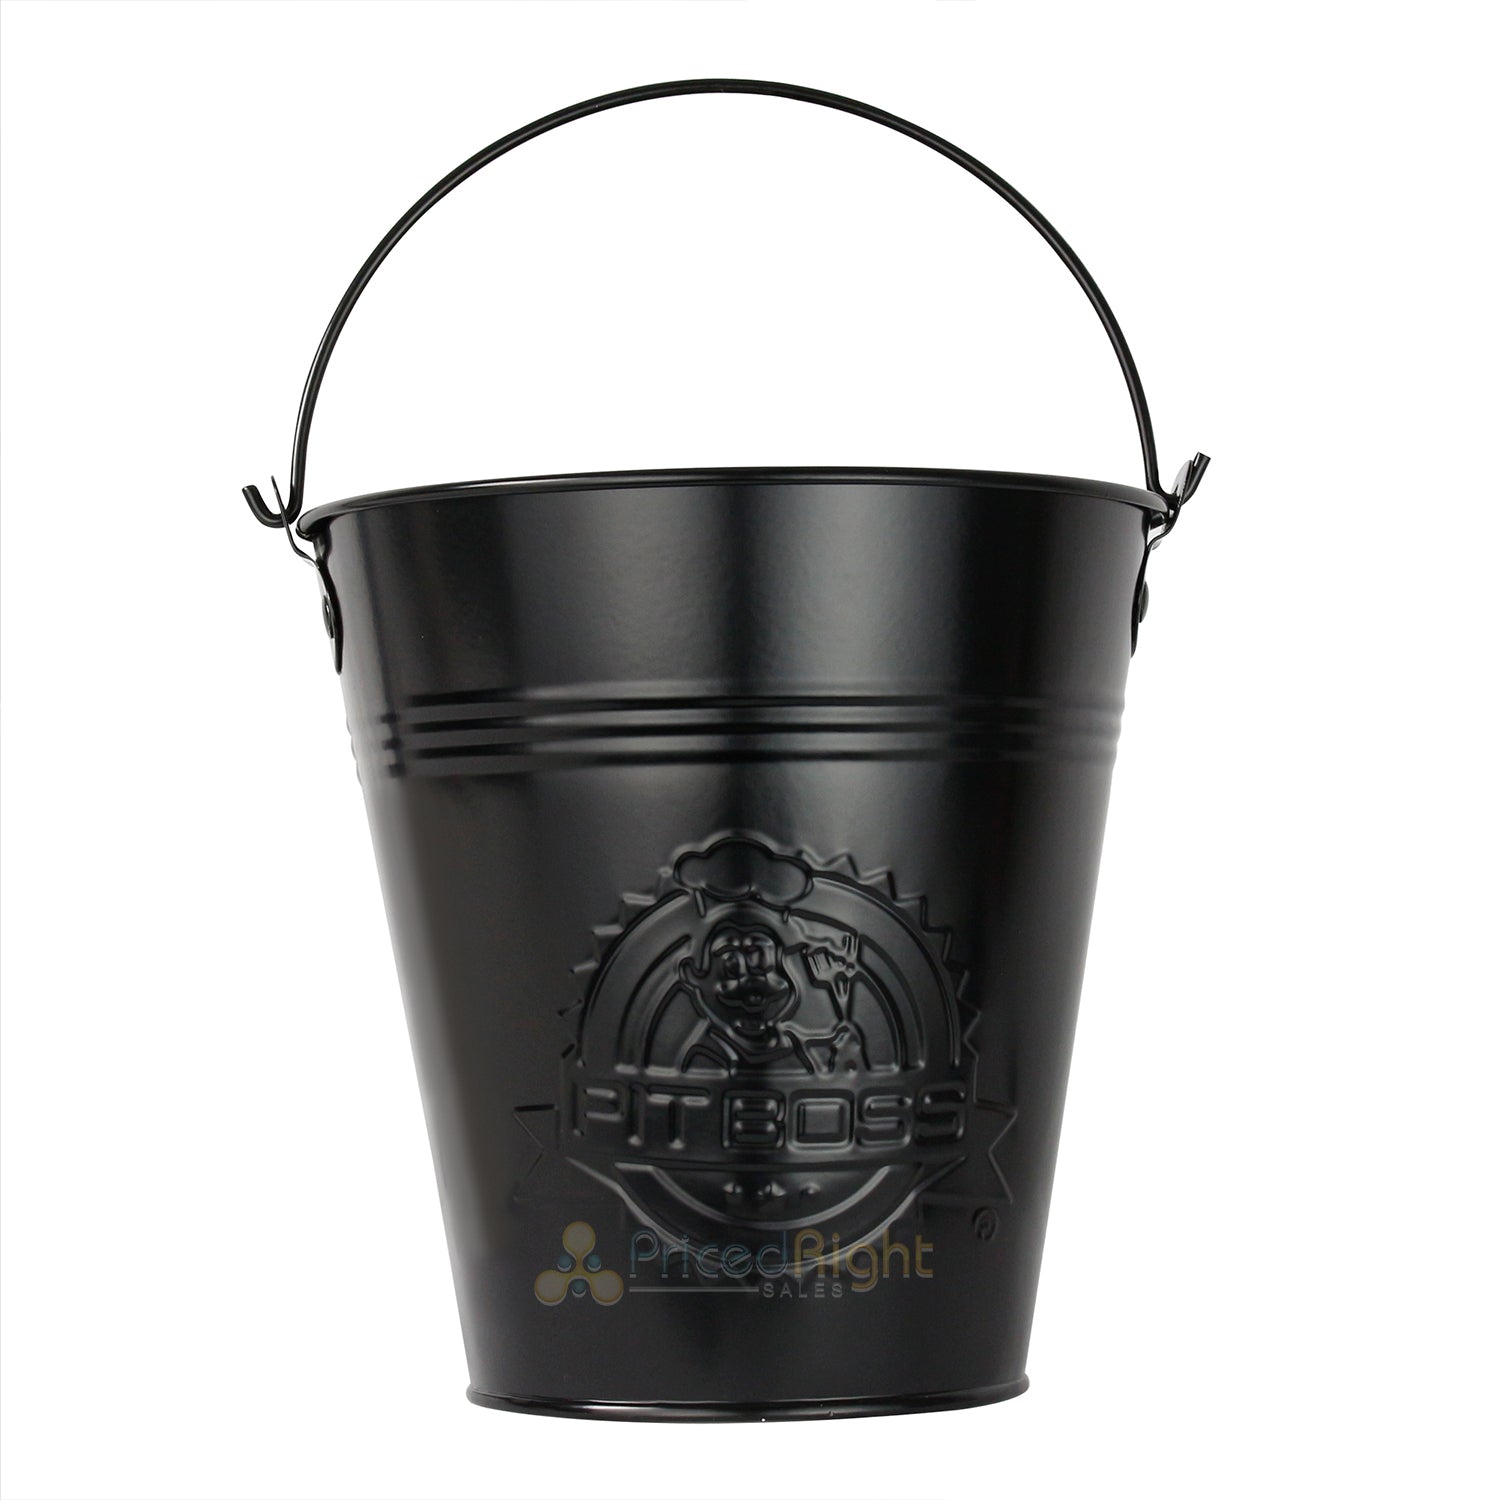 Pit Boss Stainless Steel Grease Catch Bucket With Handle Dishwasher Safe Black